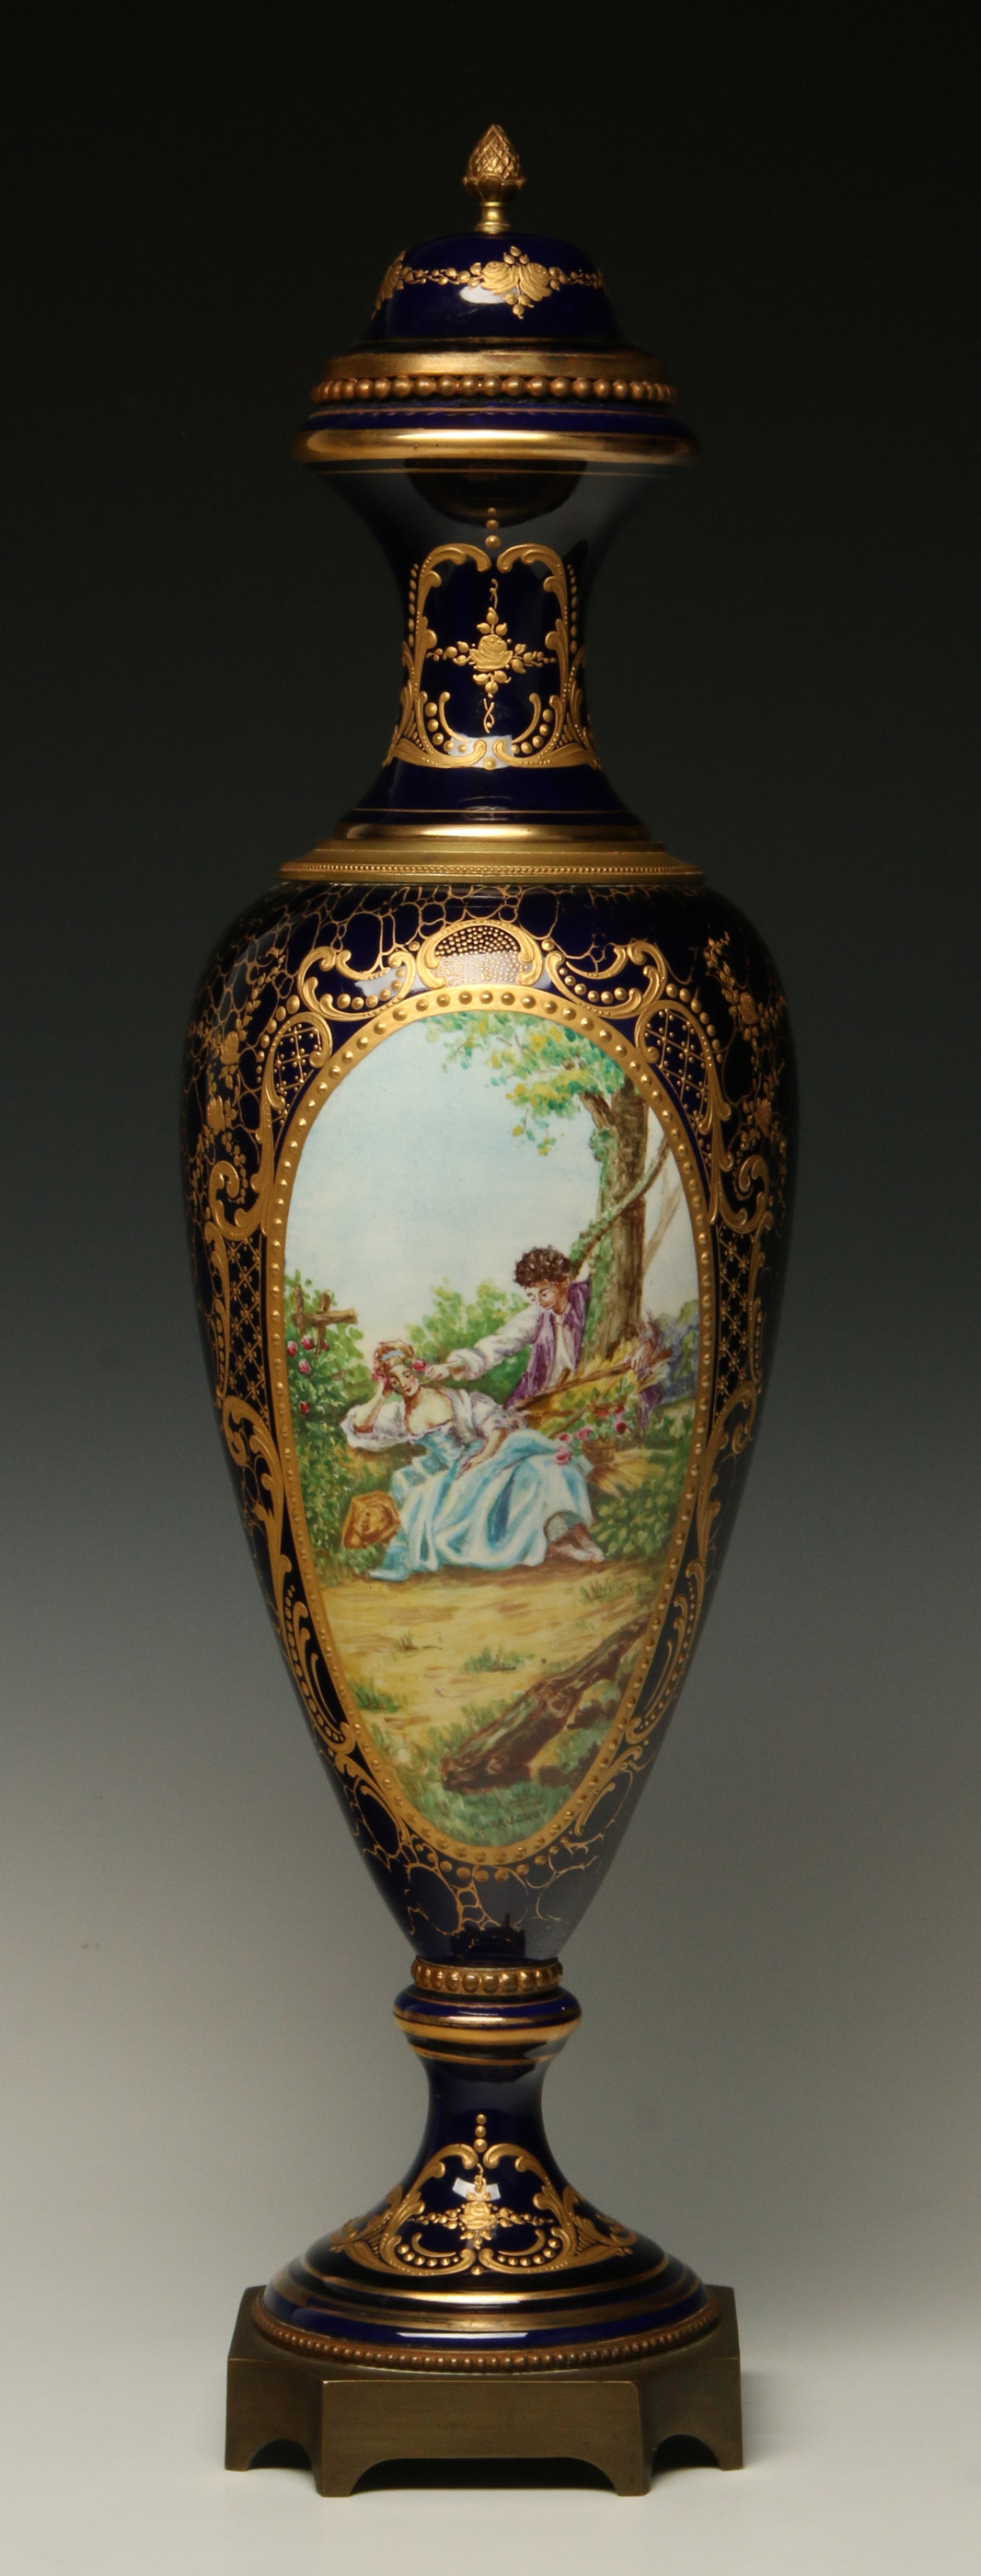 A 20TH CENTURY SEVRES STYLE URN WITH BRONZE MOUNTS